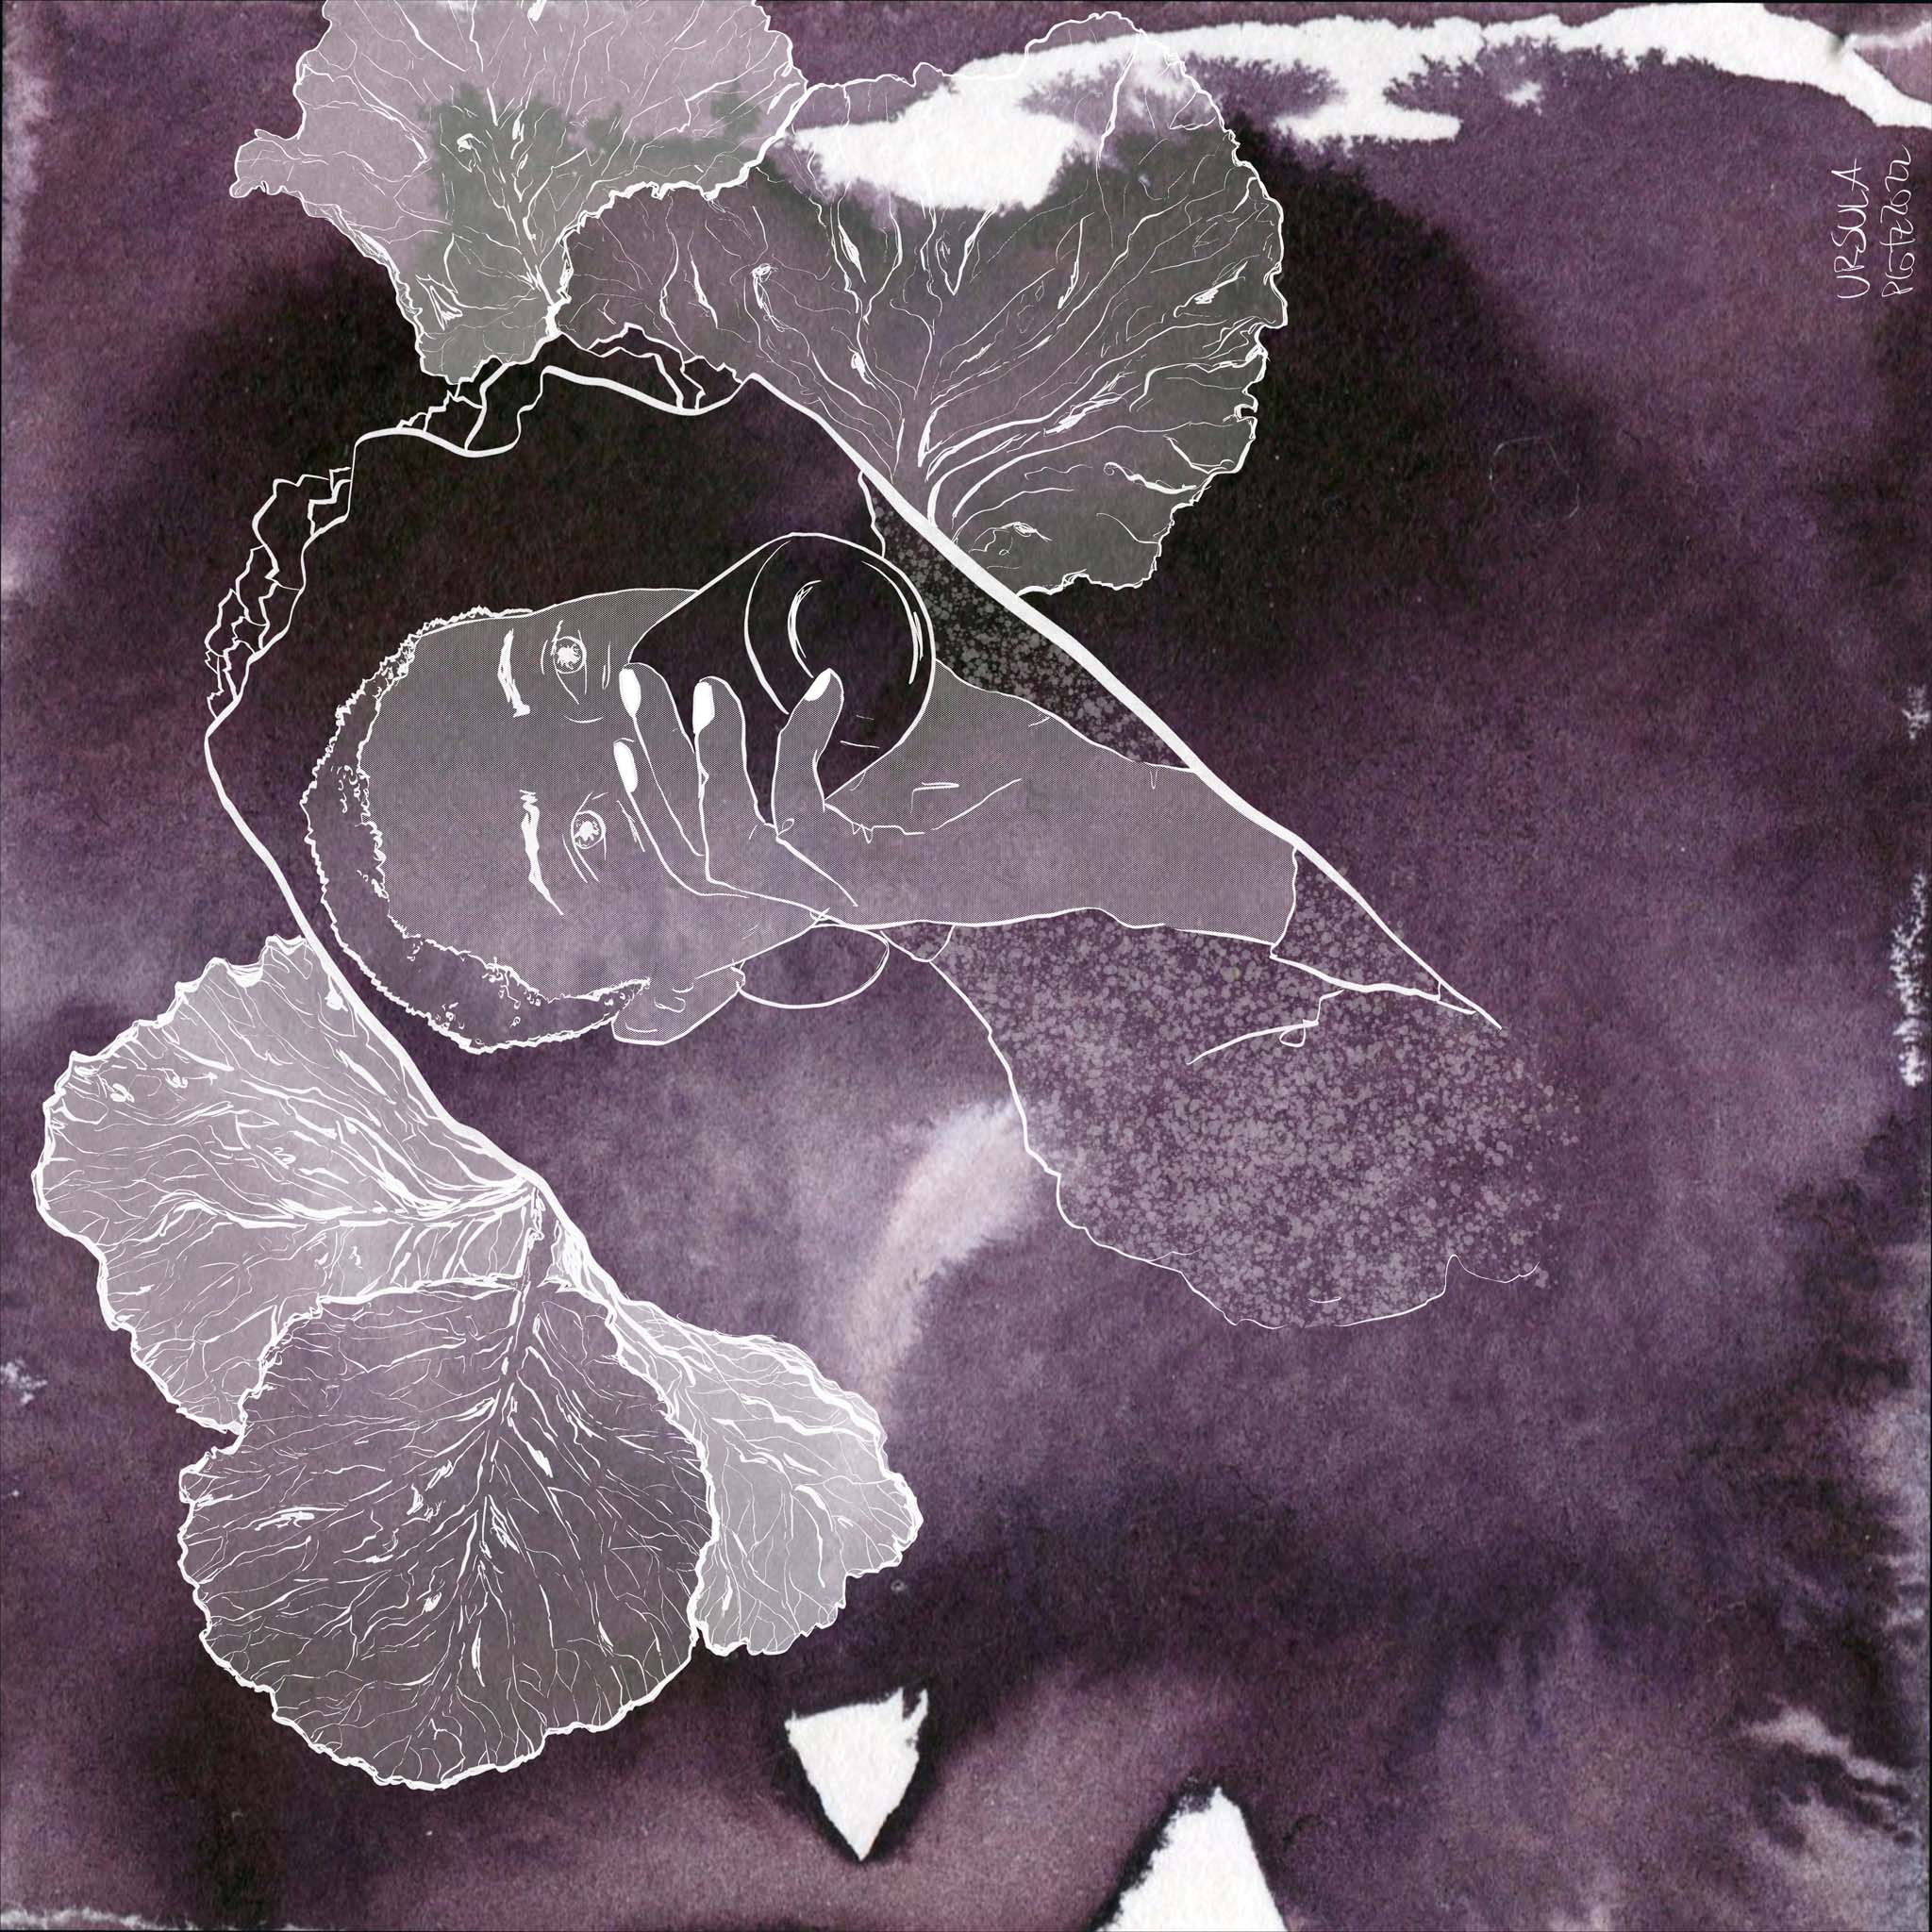 Dark purple ink background with short haired face, drinking out of a cup, cabbage leaves around them, digitally inke